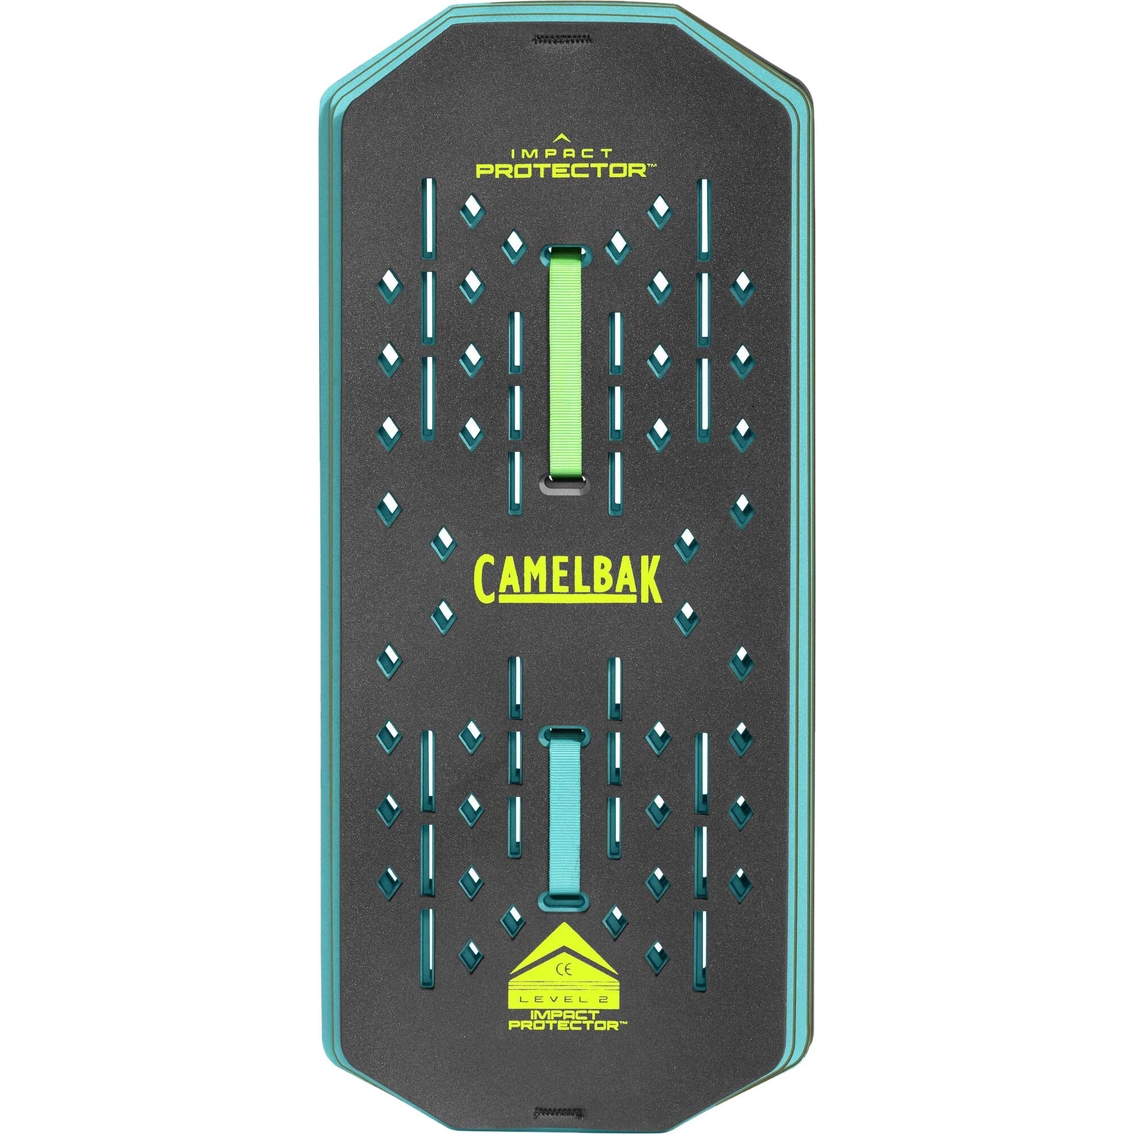 Camelbak Impact Protector Panel - Image 2 of 6